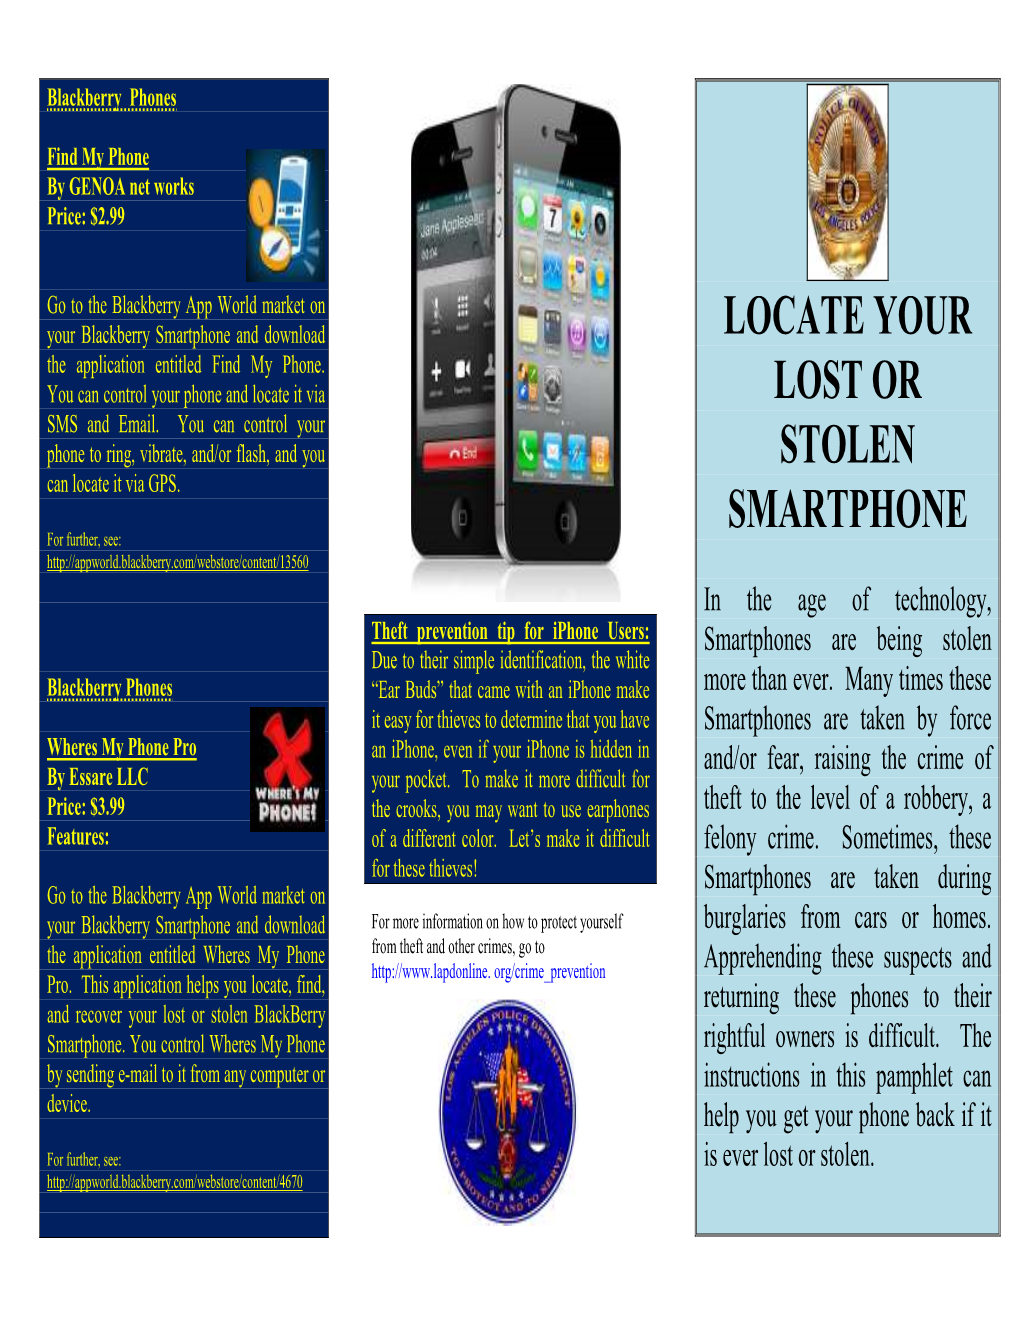 Locate Your Lost Or Stolen Smartphone